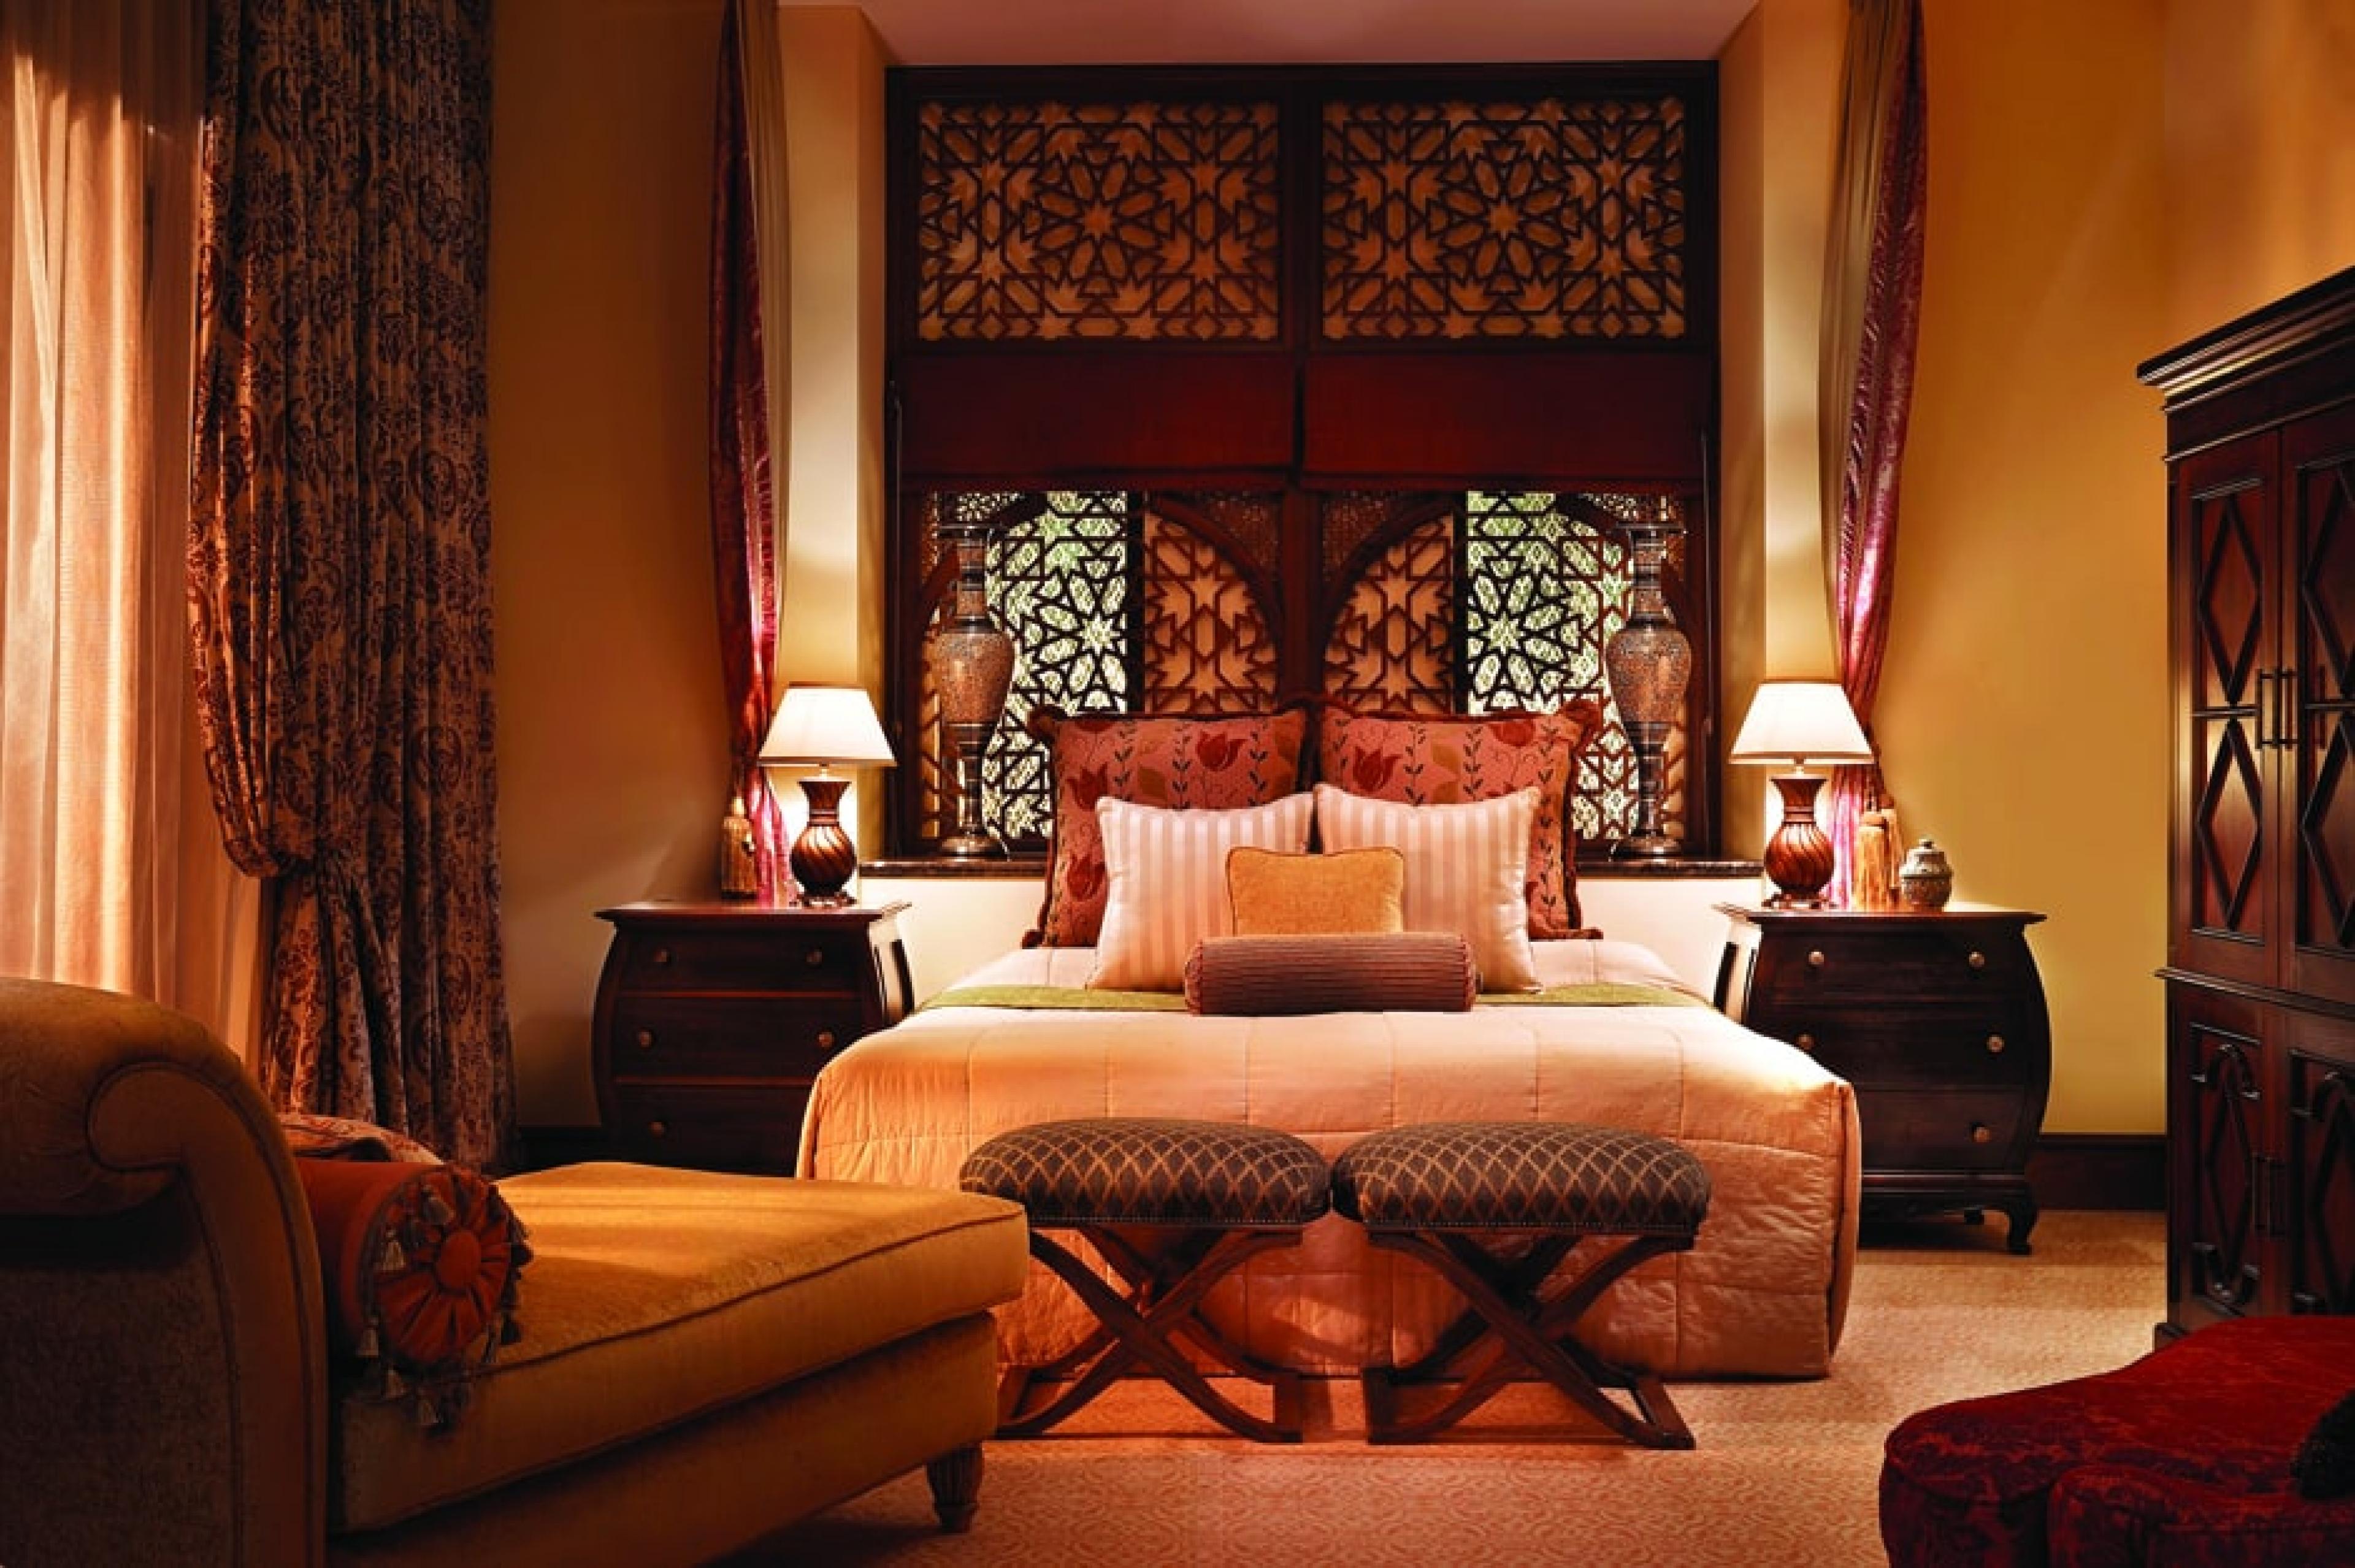 Suite at One & Only Royal Mirage, Dubai, United Arab Emirates